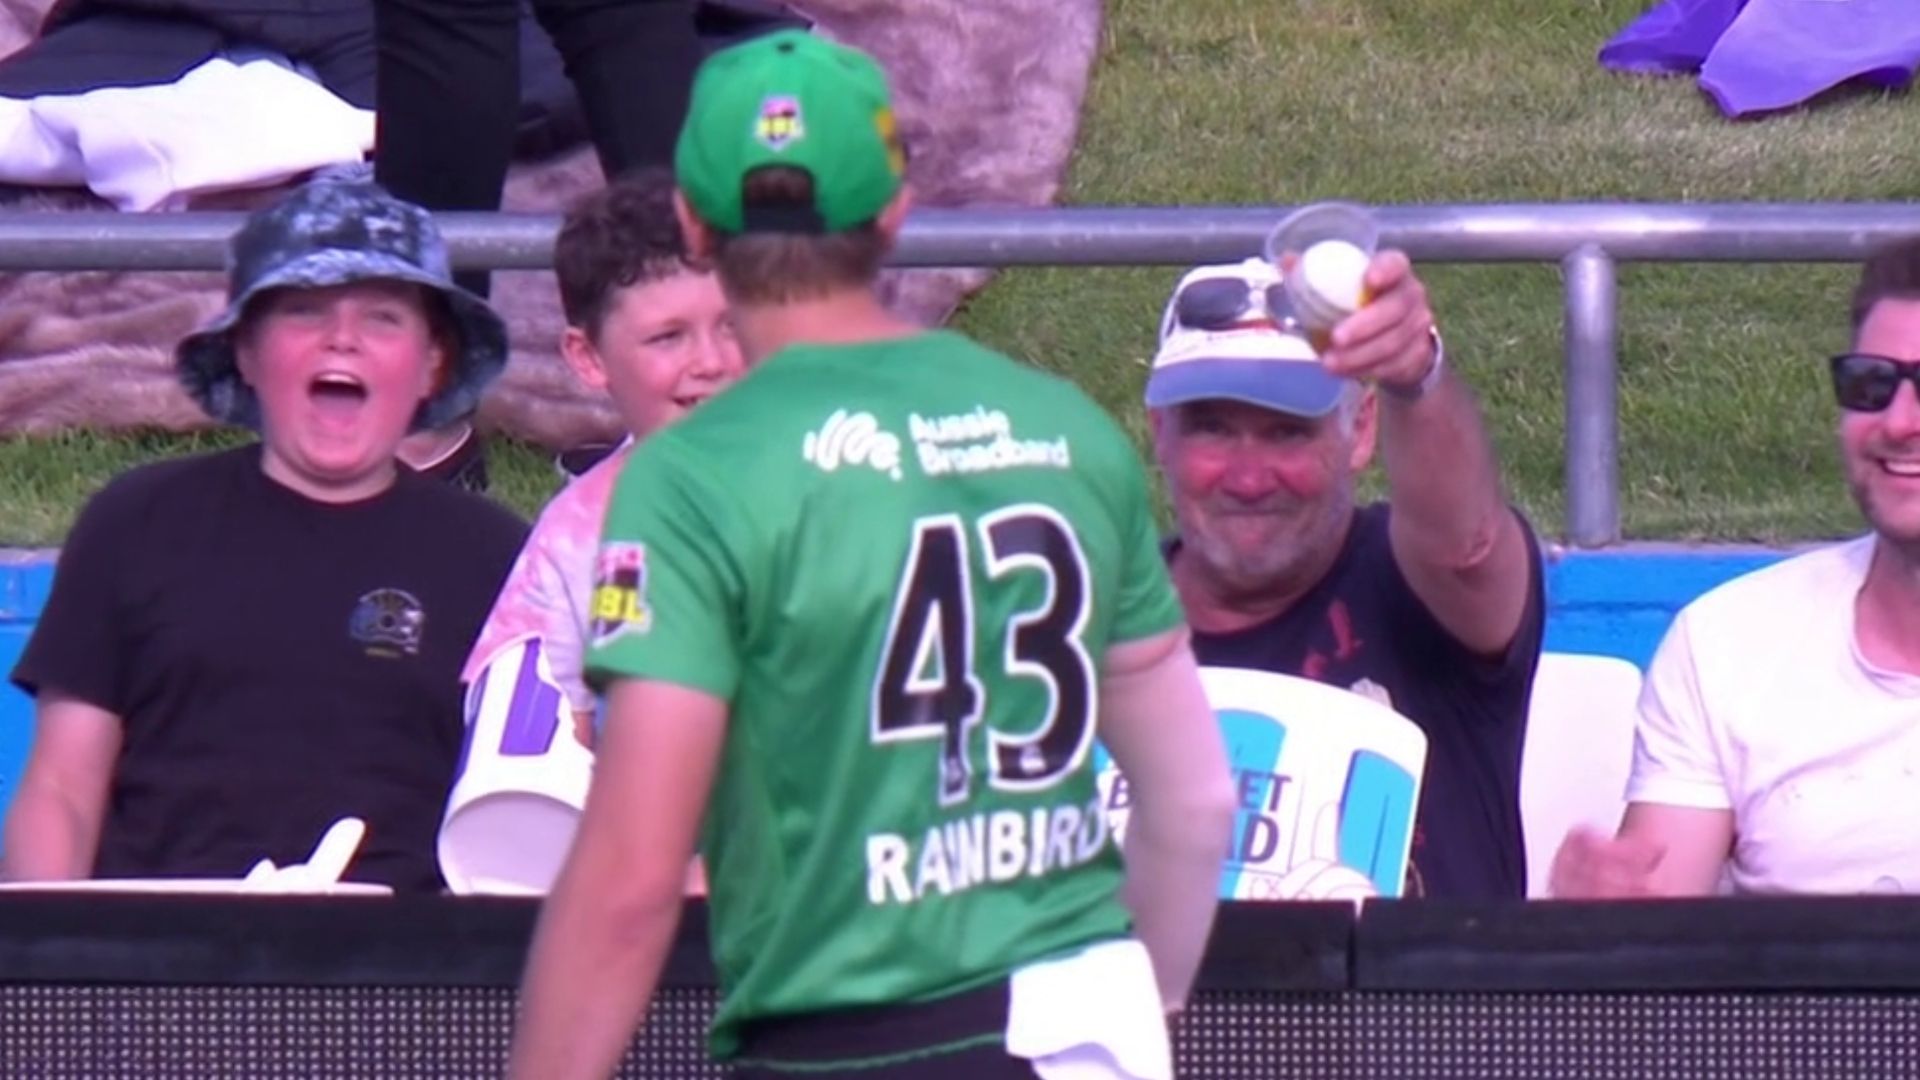 The old man with beer cup gulped the drink down before throwing the ball | Screengrab